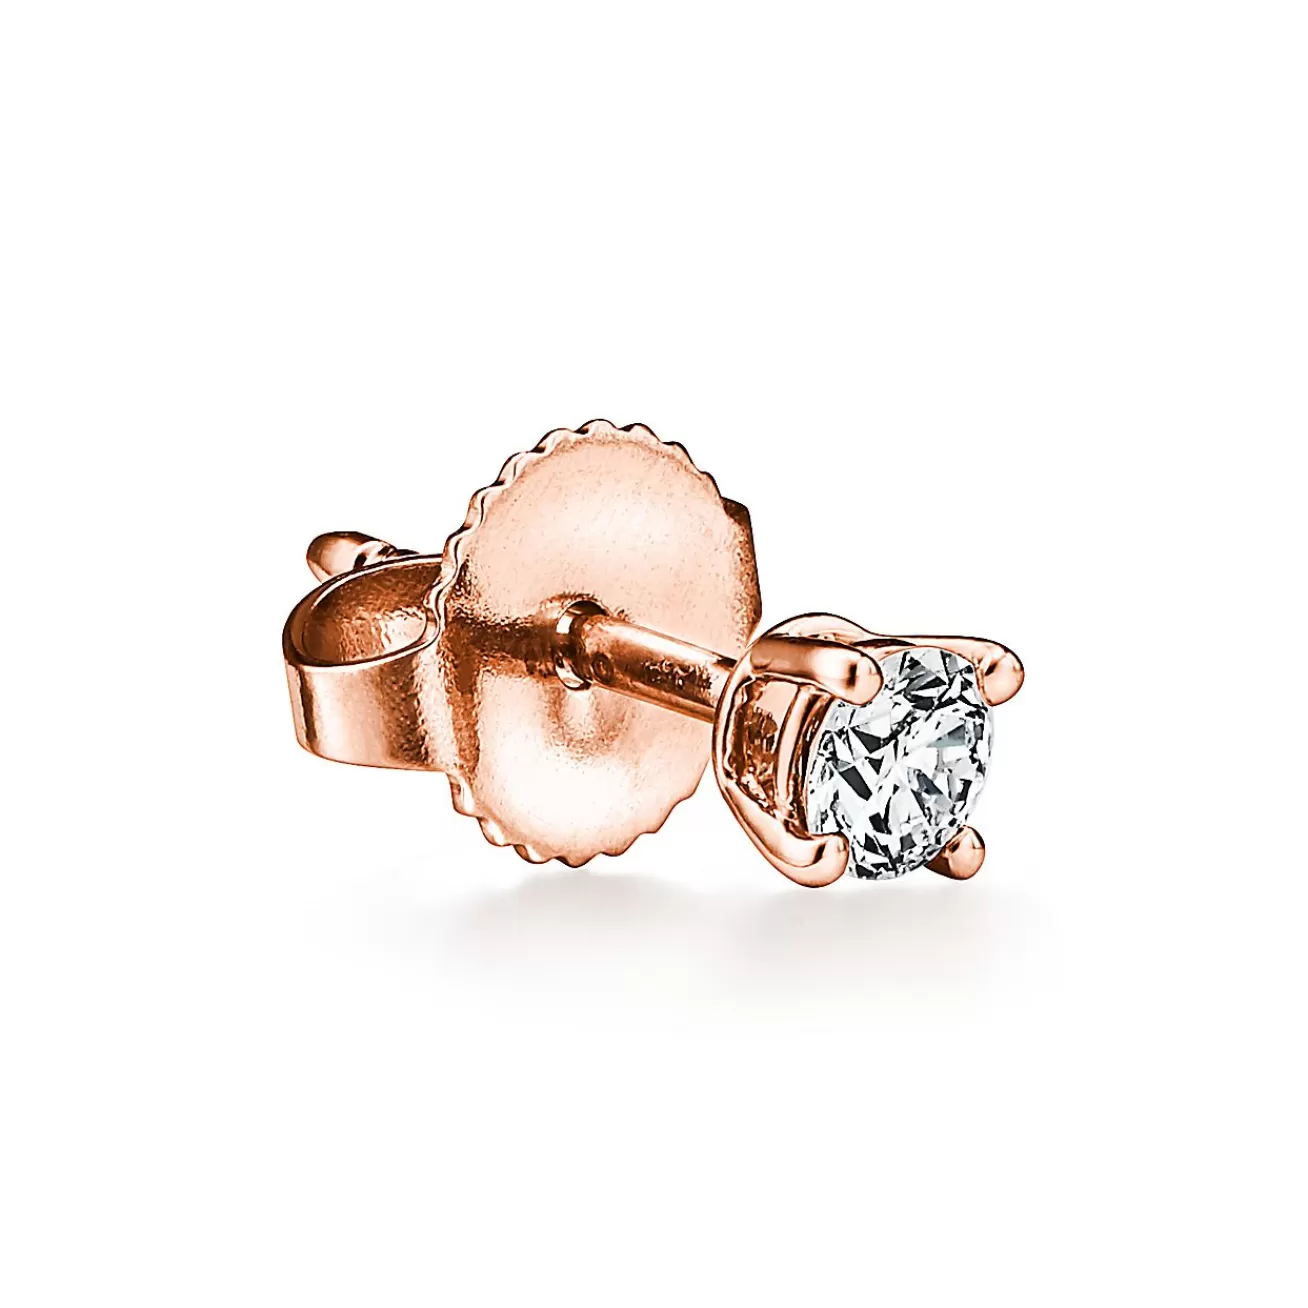 Tiffany & Co. Tiffany Solitaire Diamond Stud Earrings in Rose Gold | ^ Earrings | Gifts for Her